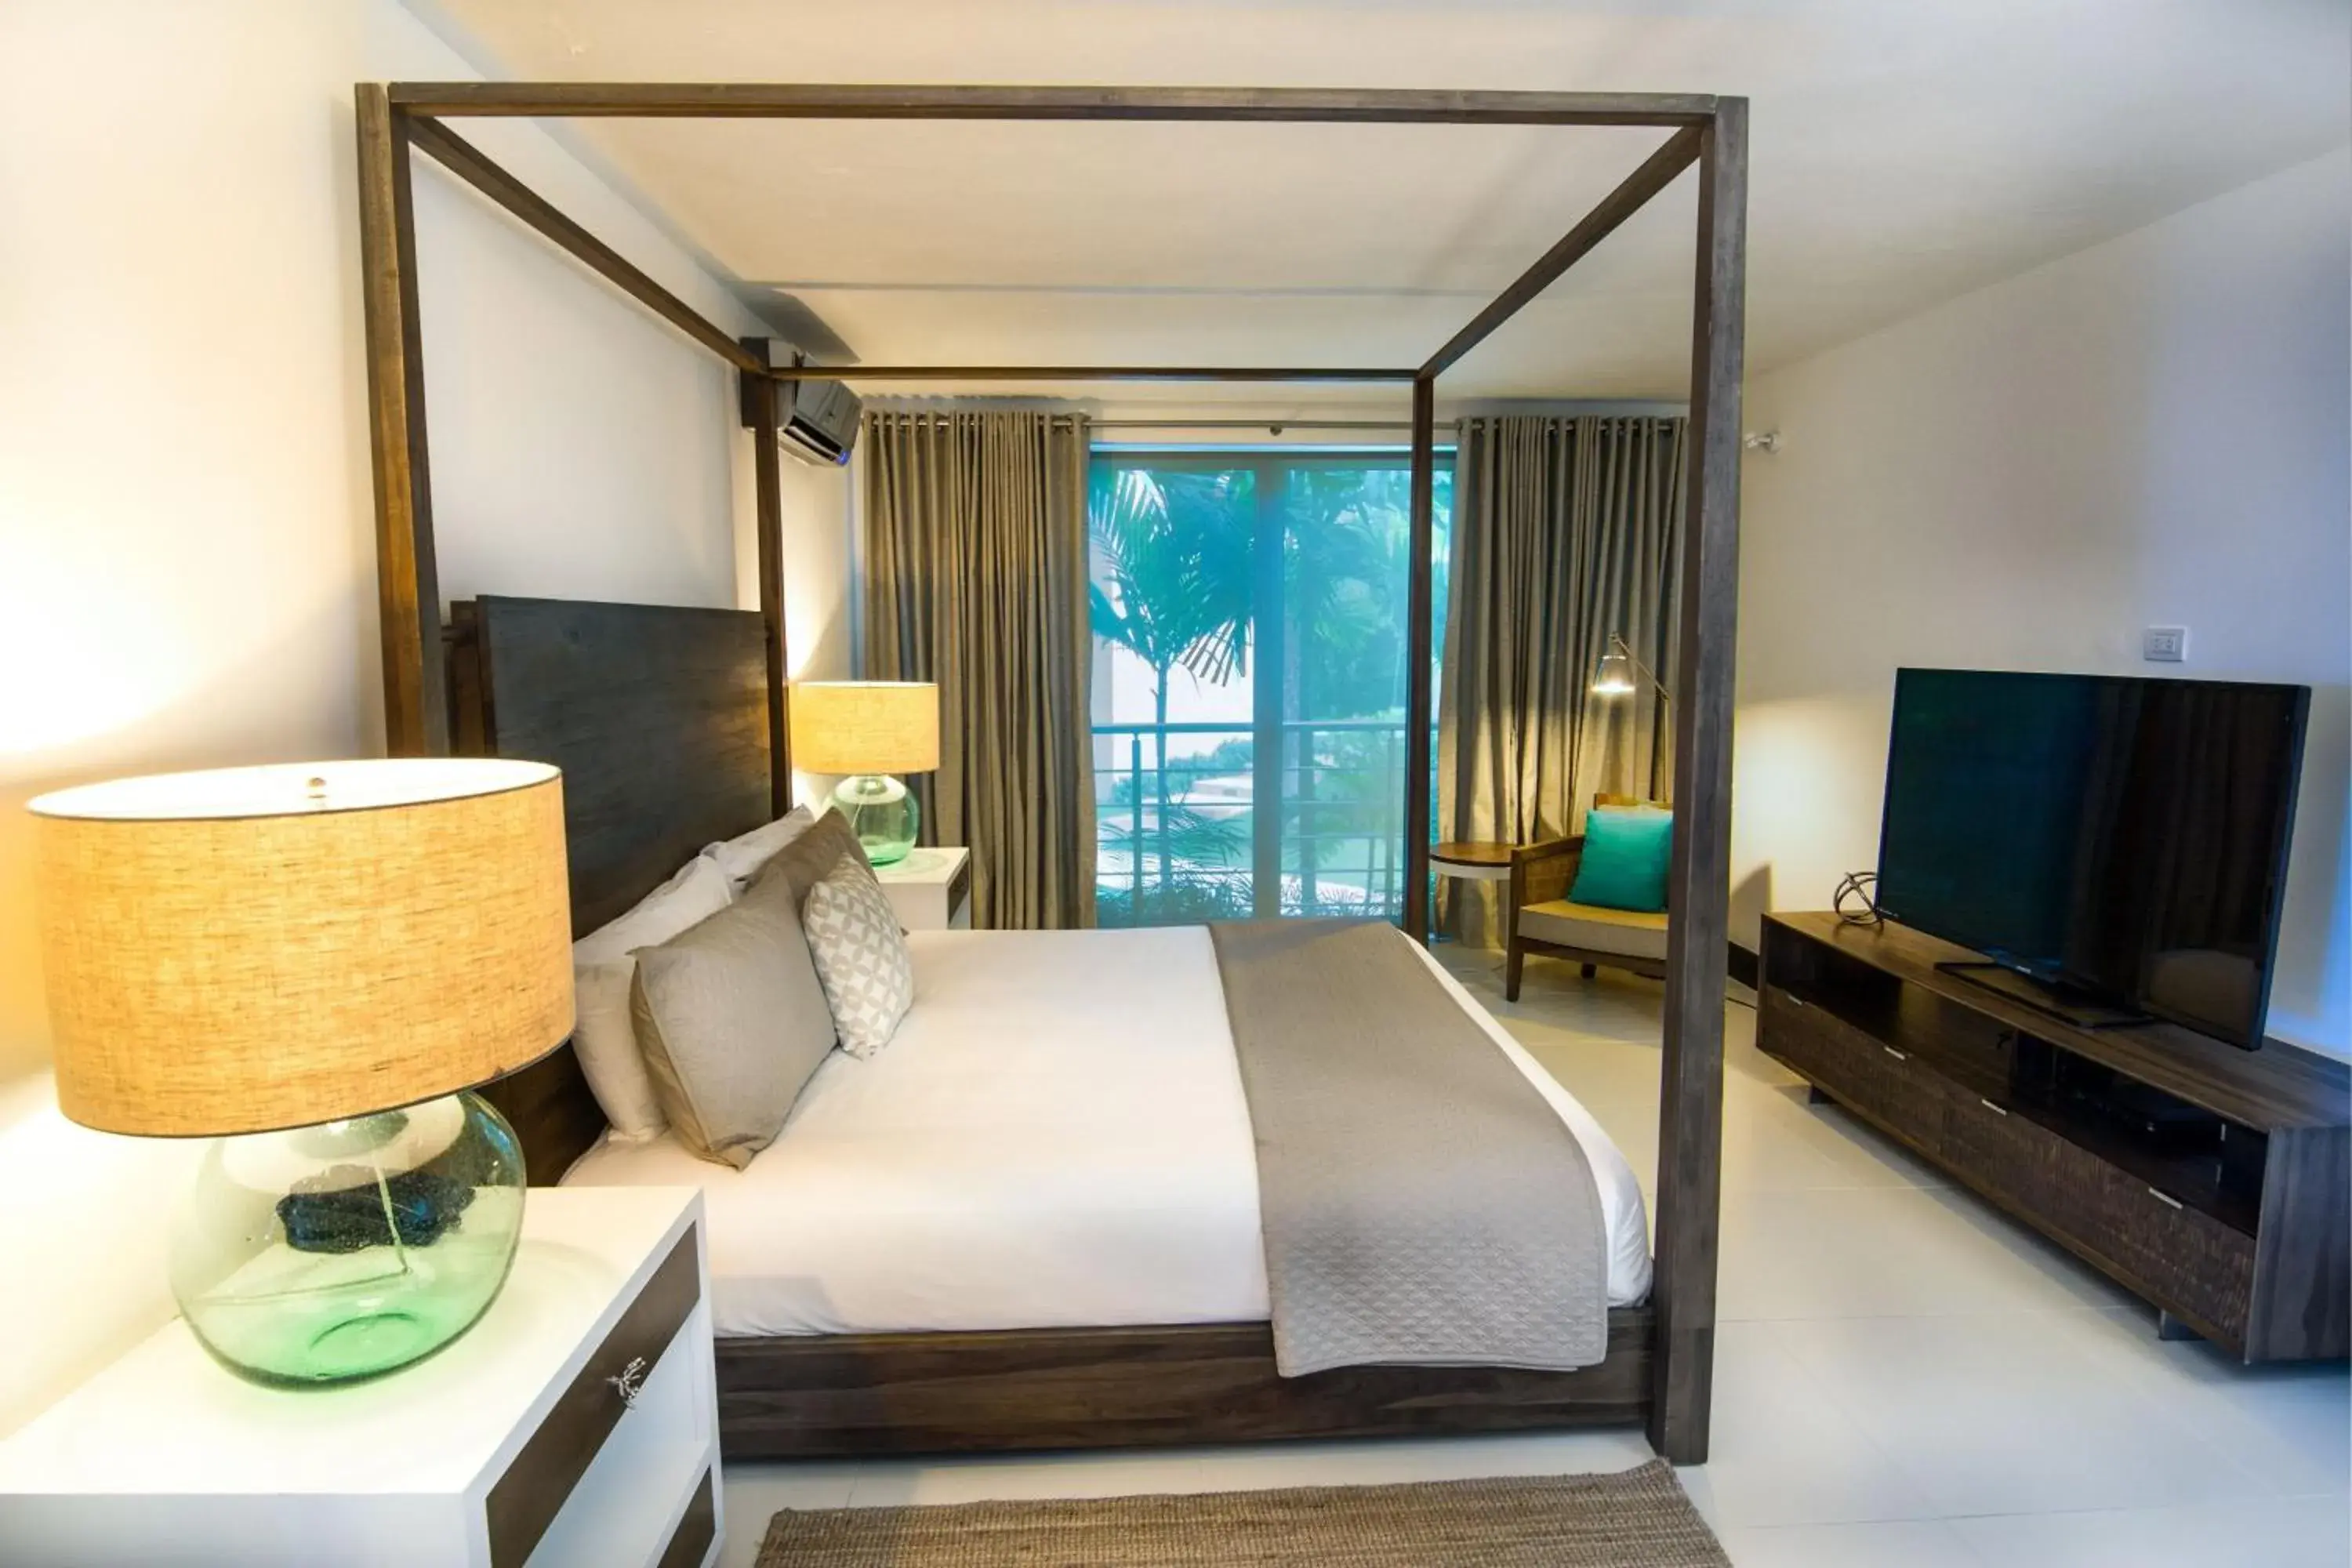 Bedroom, TV/Entertainment Center in The Ocean Club, a Luxury Collection Resort, Costa Norte